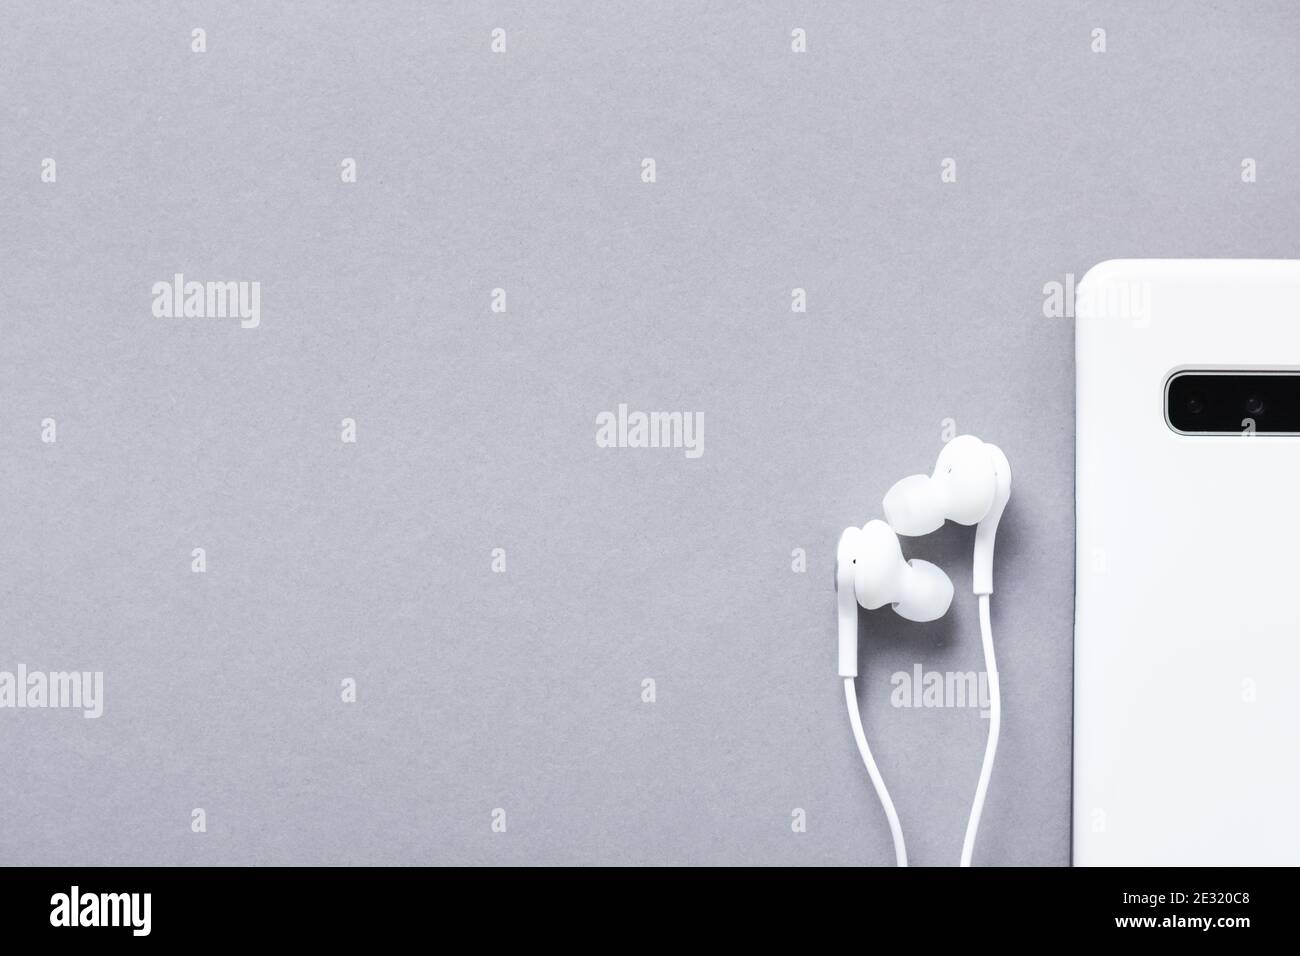 Modern White earphones and mobile phone on a gray background. Minimalist style. Top view with copy space. Stock Photo